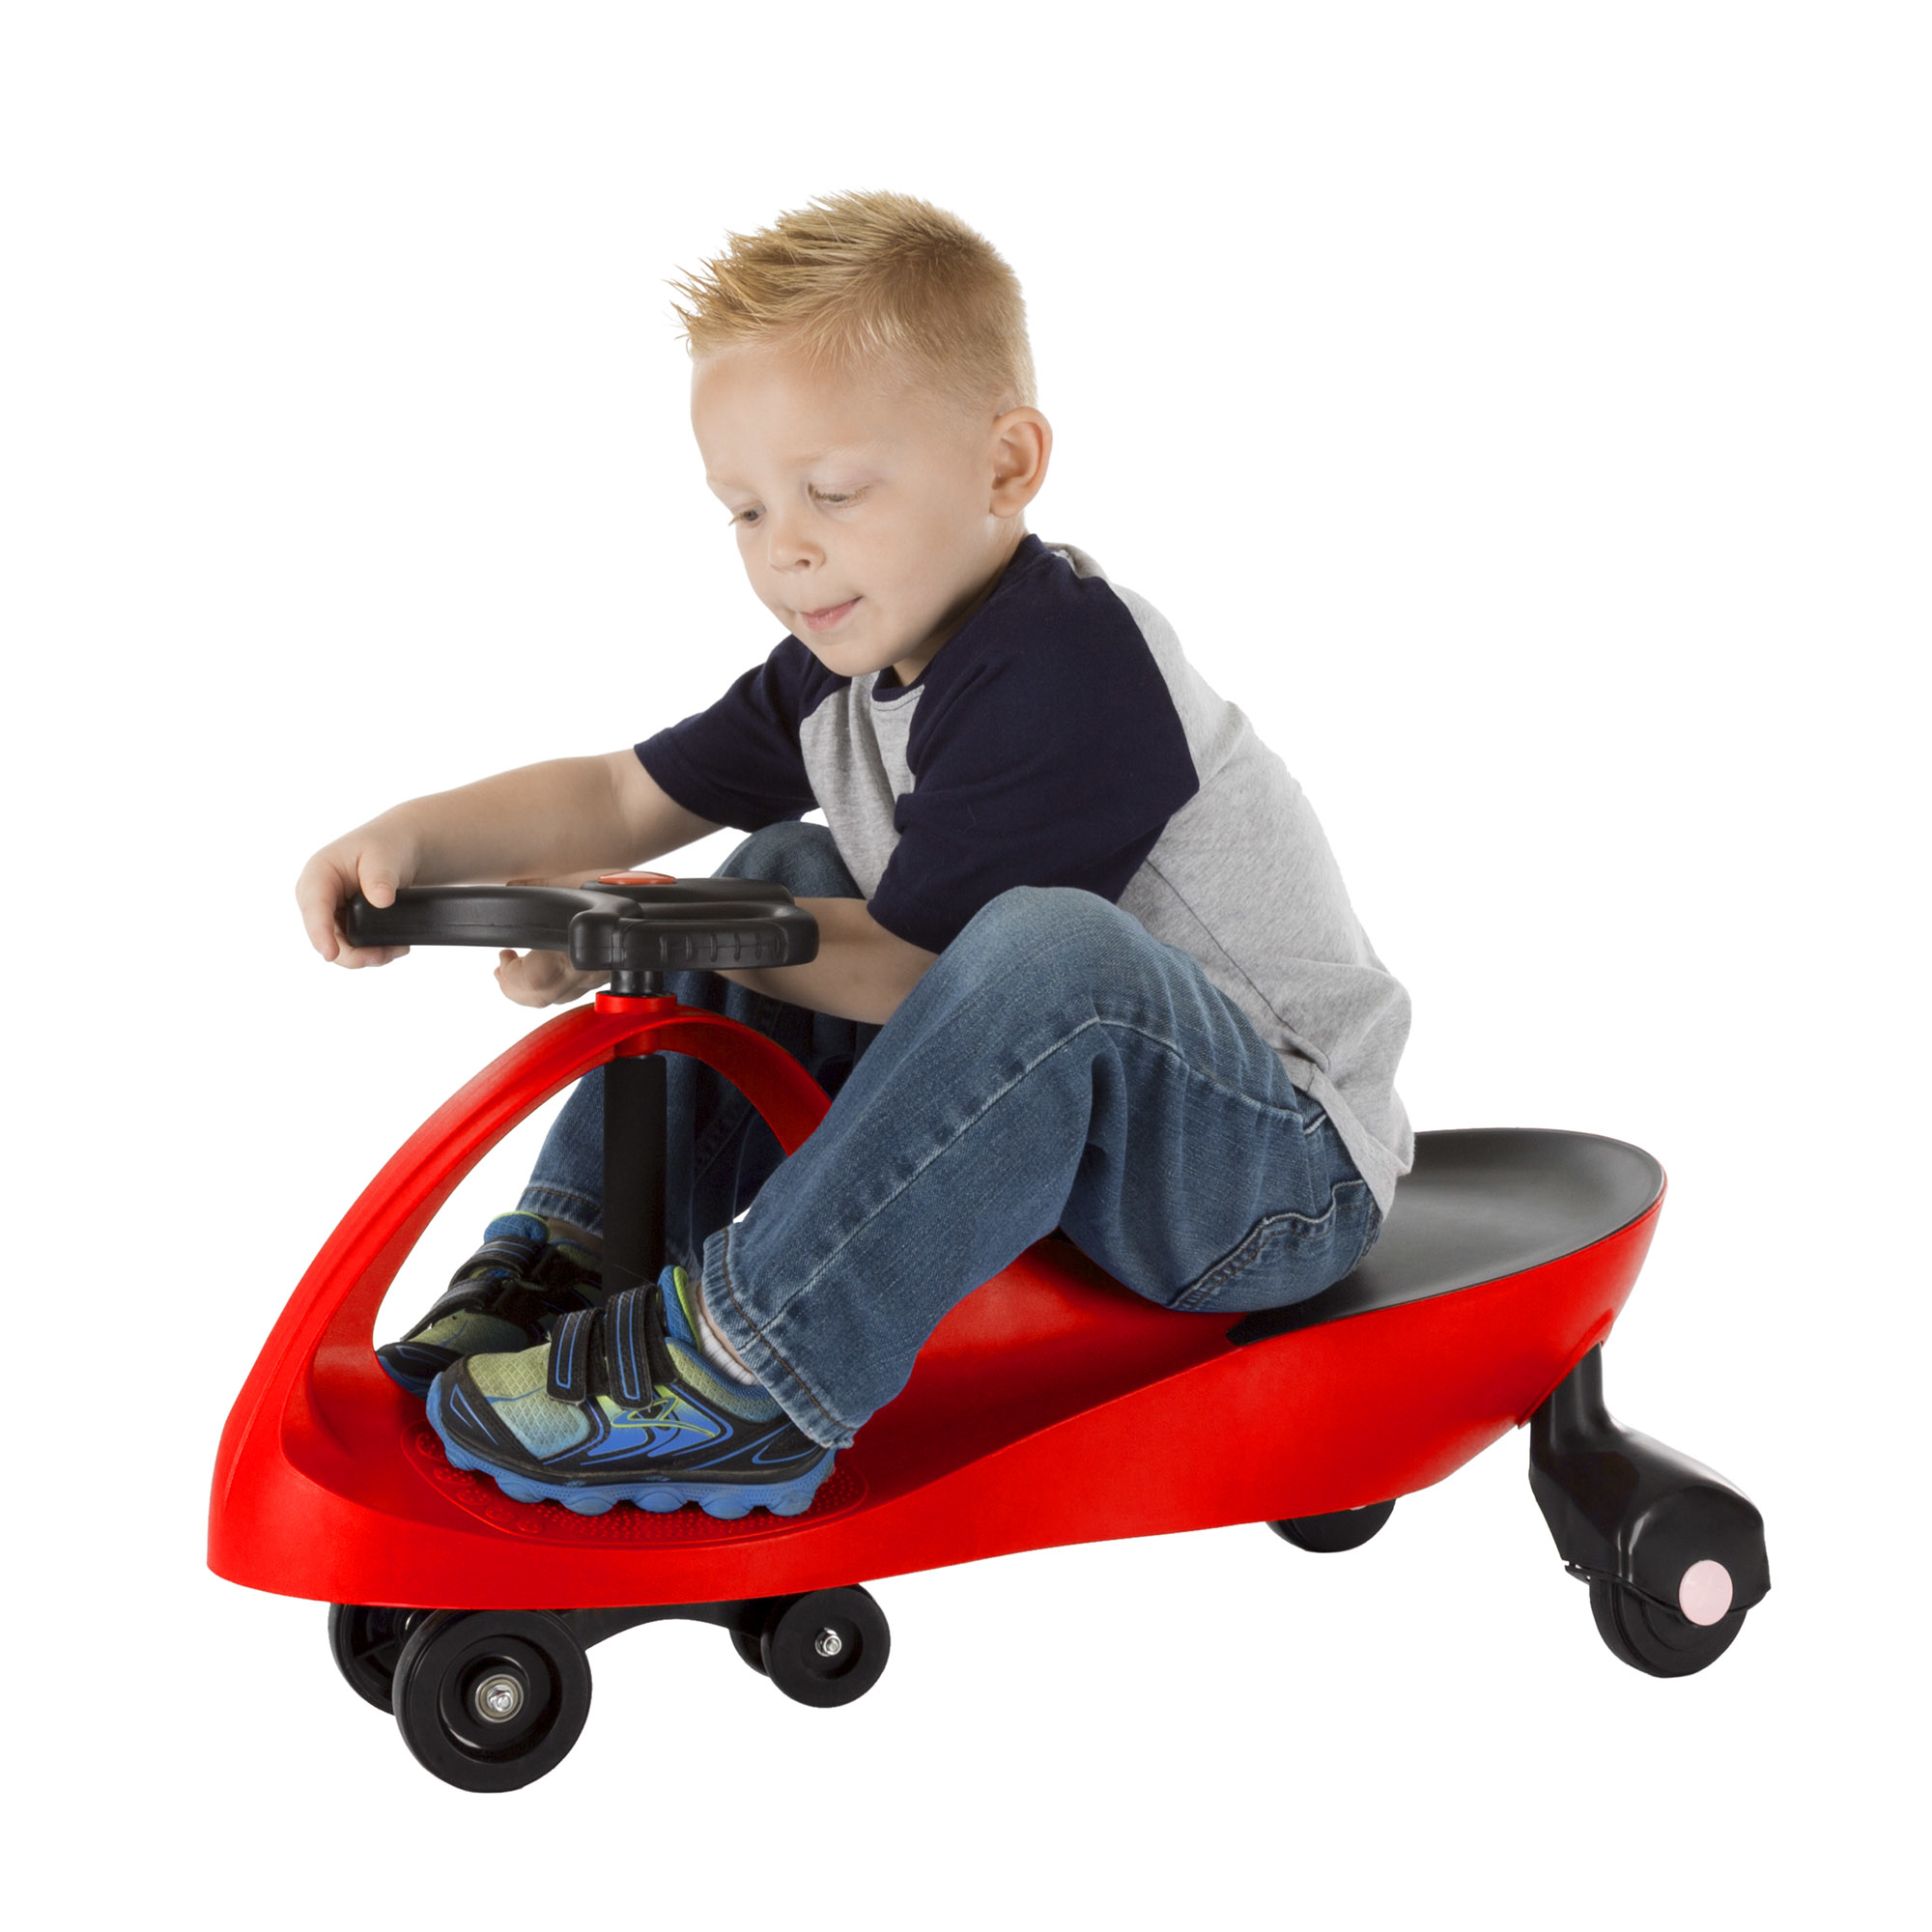 Ride On Toy ZigZag Twistcar Wiggle No Batteries, No Gears, No Pedals Easy Red Kids 2 - 6 Yrs